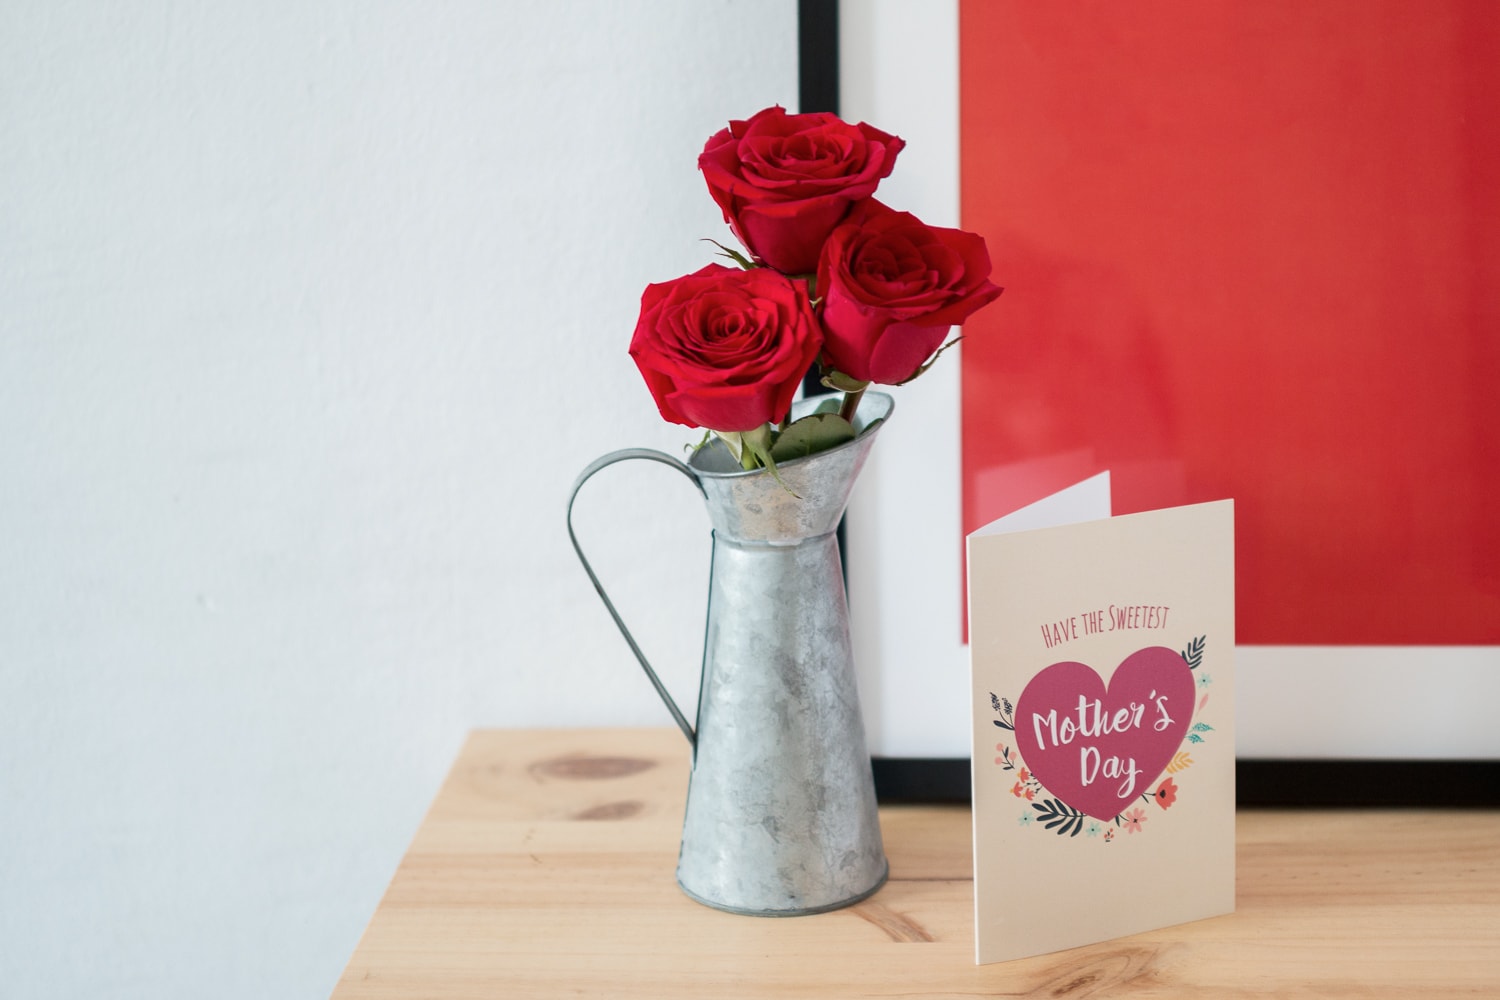 Red roses with mother's day card in a watering can vase